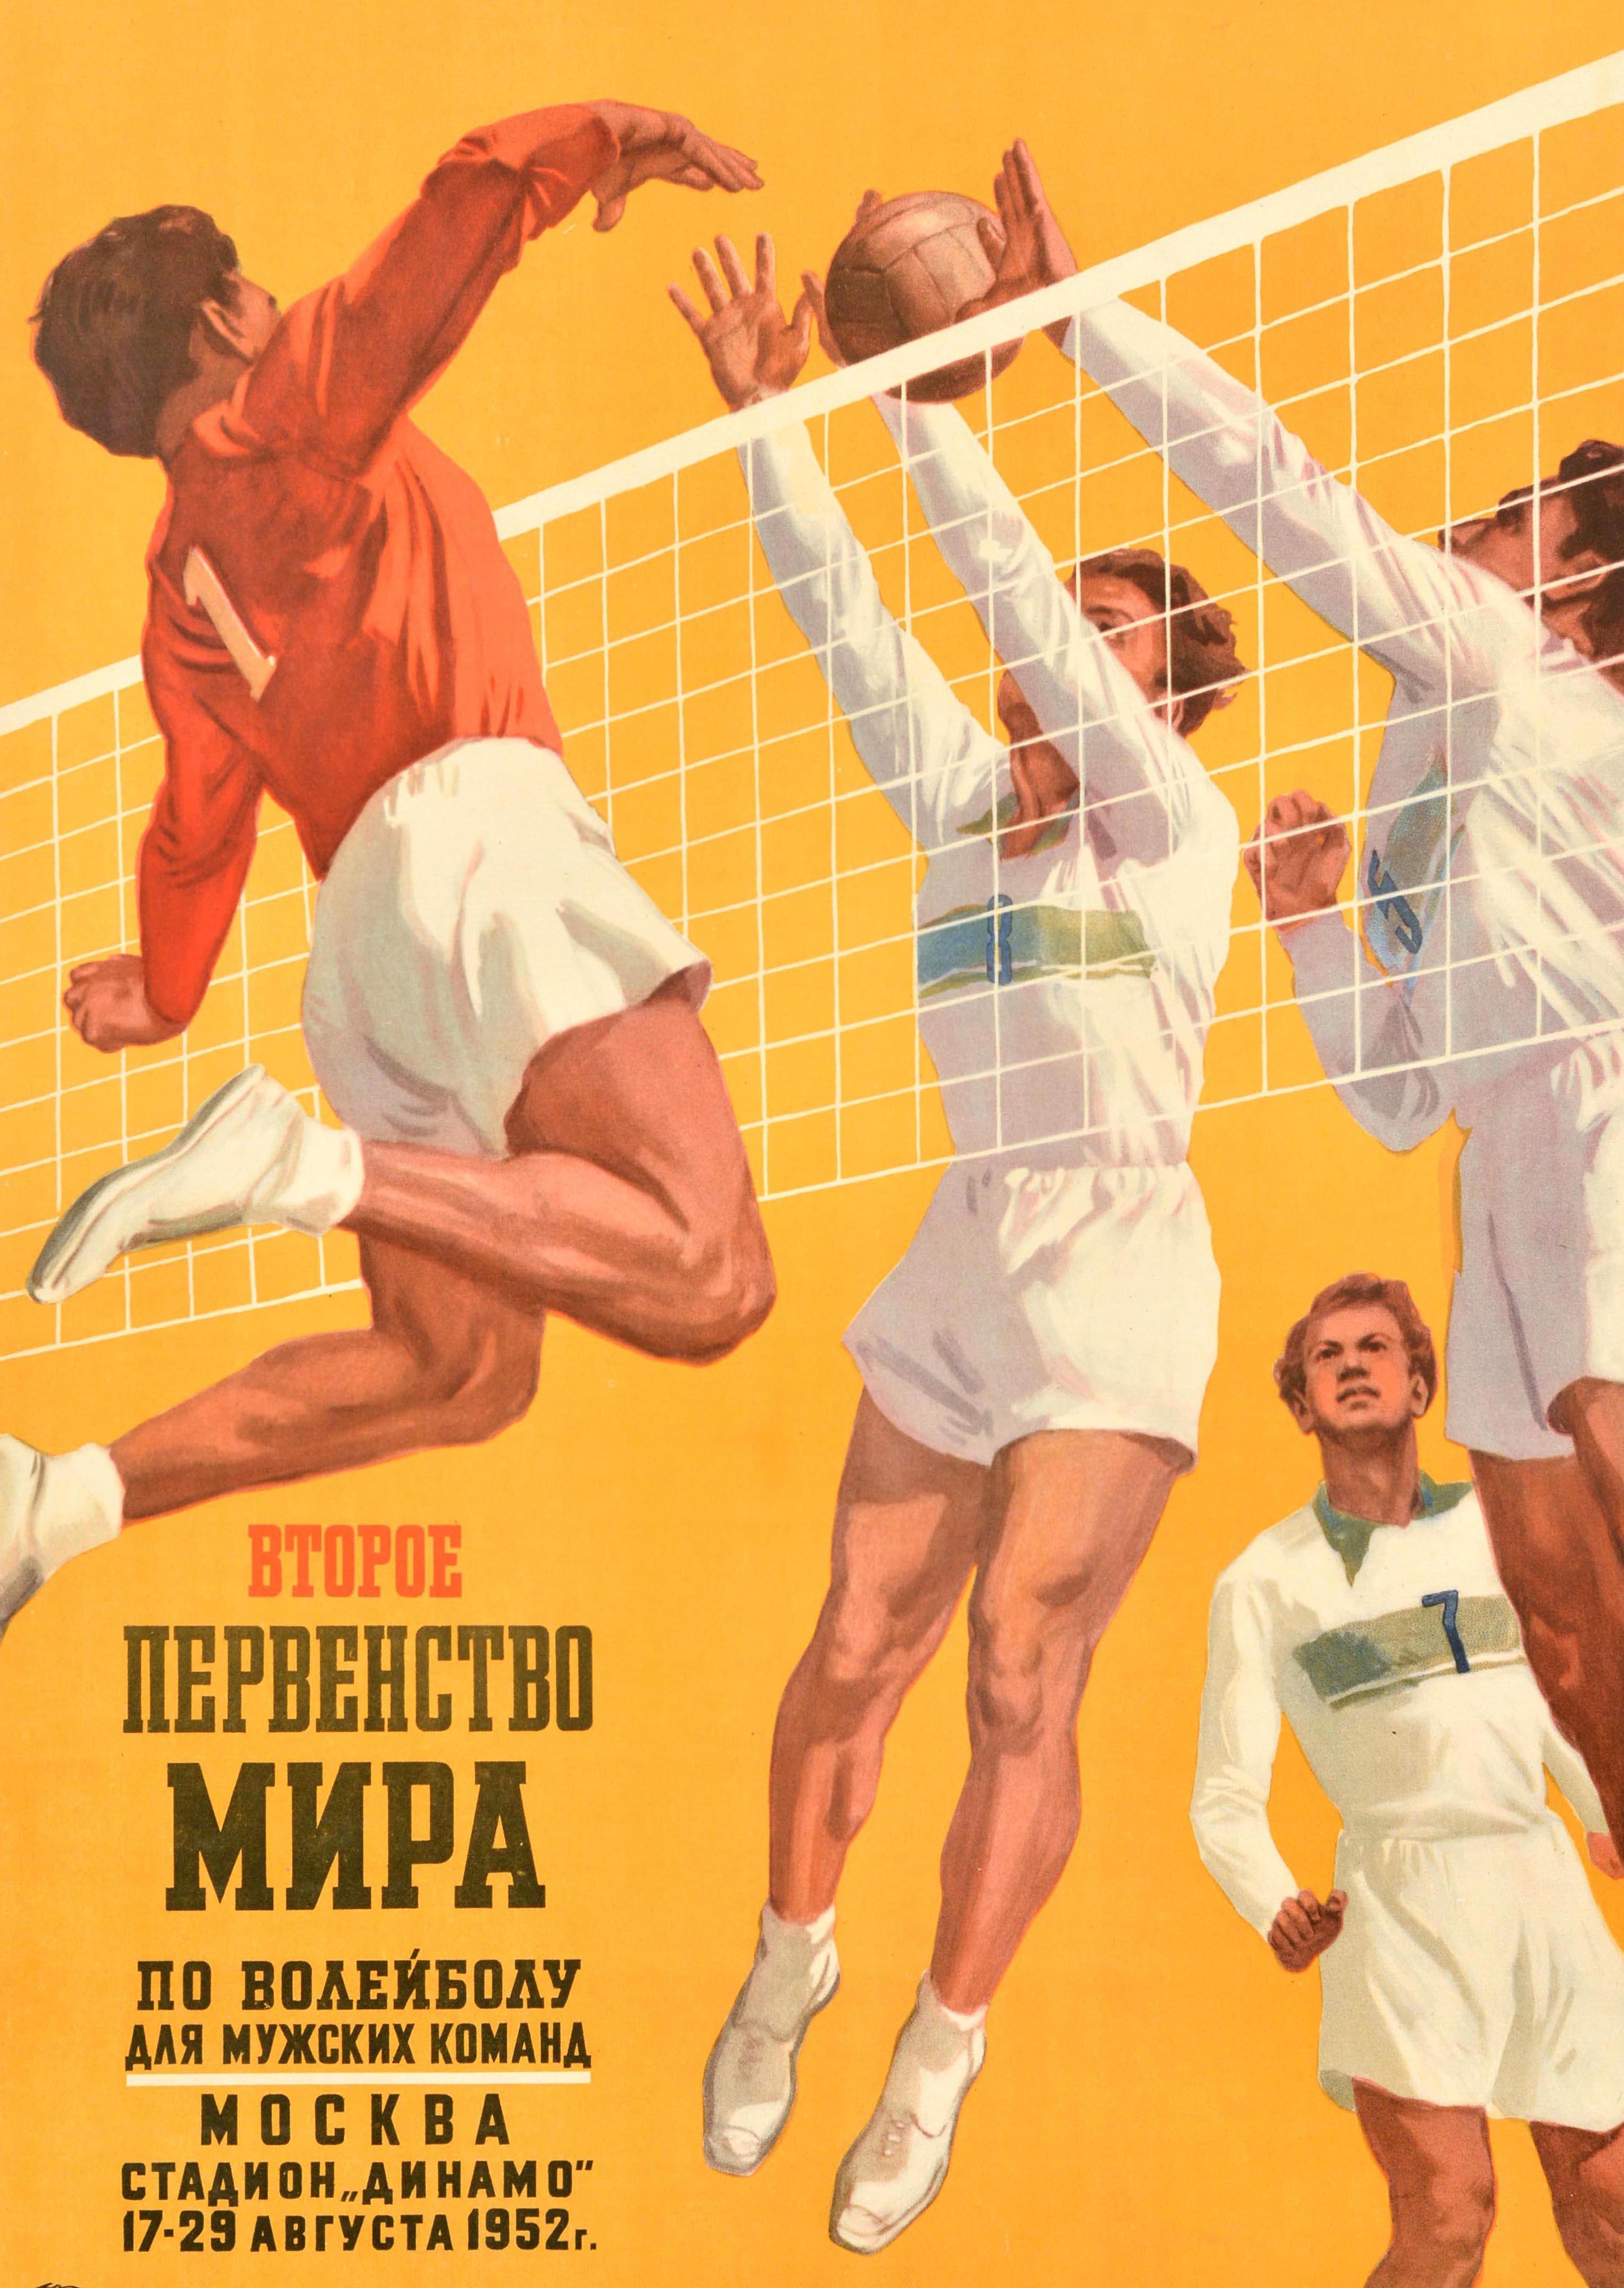 Original vintage sports poster for the Second World Championship Men's Volleyball / Второе Первенство Мира по Волеиболу для Мужских Команд held at the Dynamo Stadium in Moscow on 17-29 August 1952 featuring a volleyball match with players jumping to